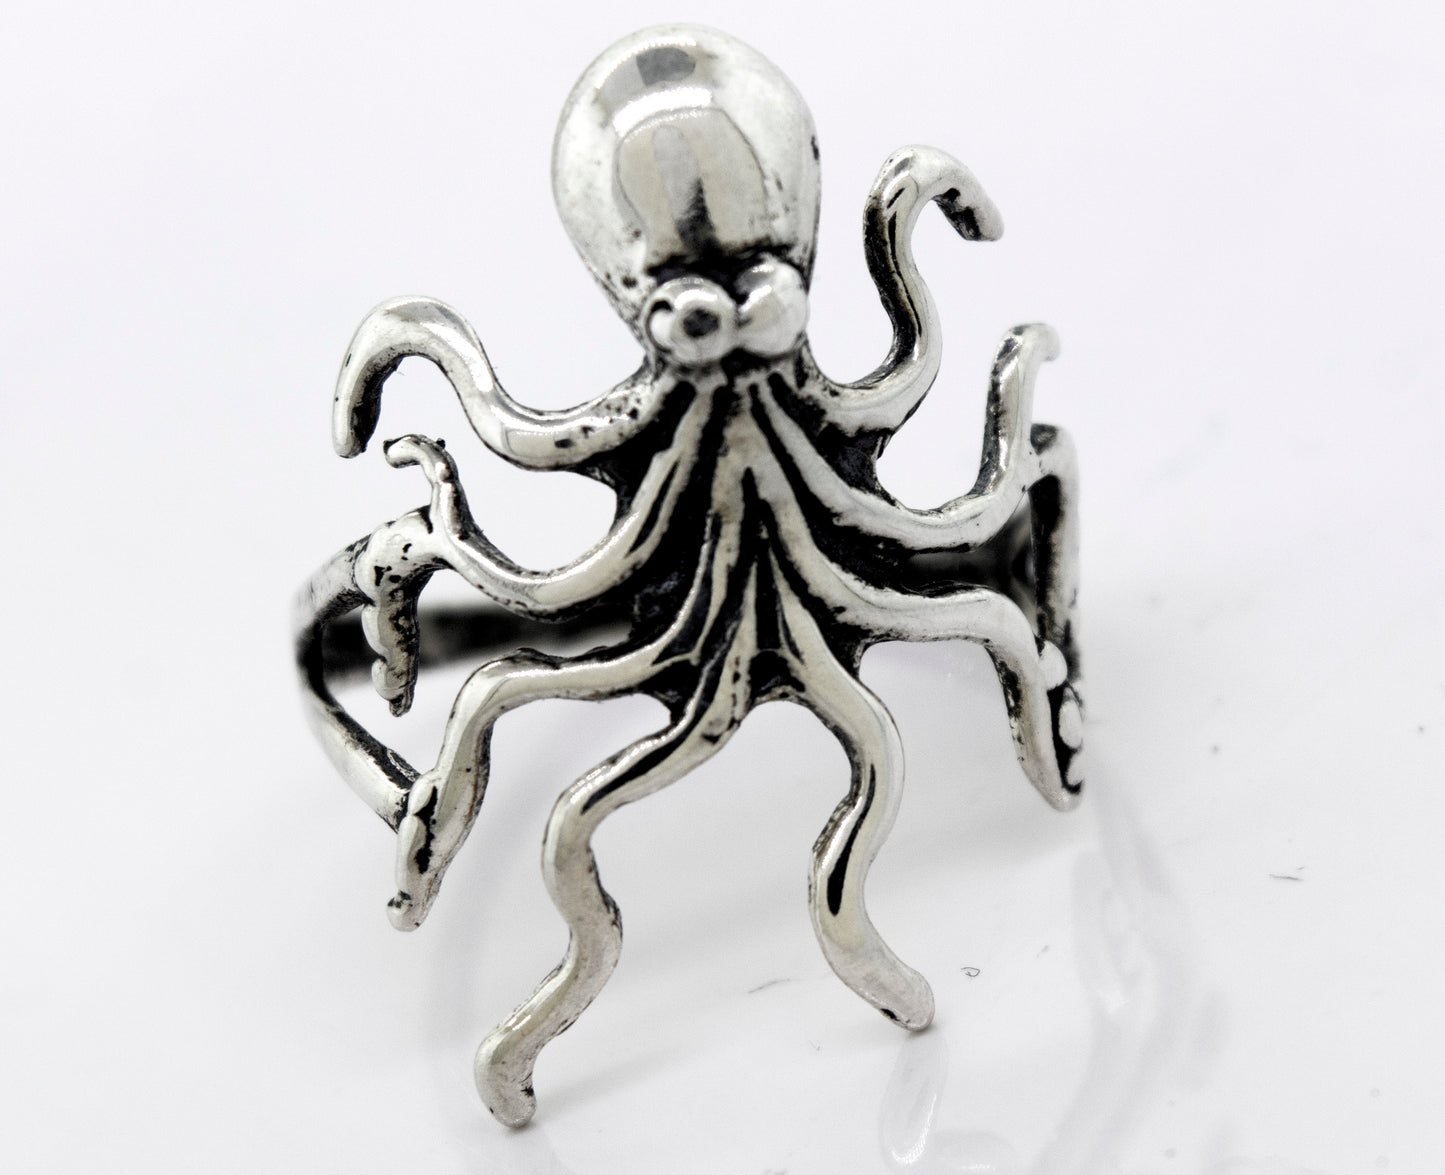 A Super Silver American Made Octopus Ring on a white surface.